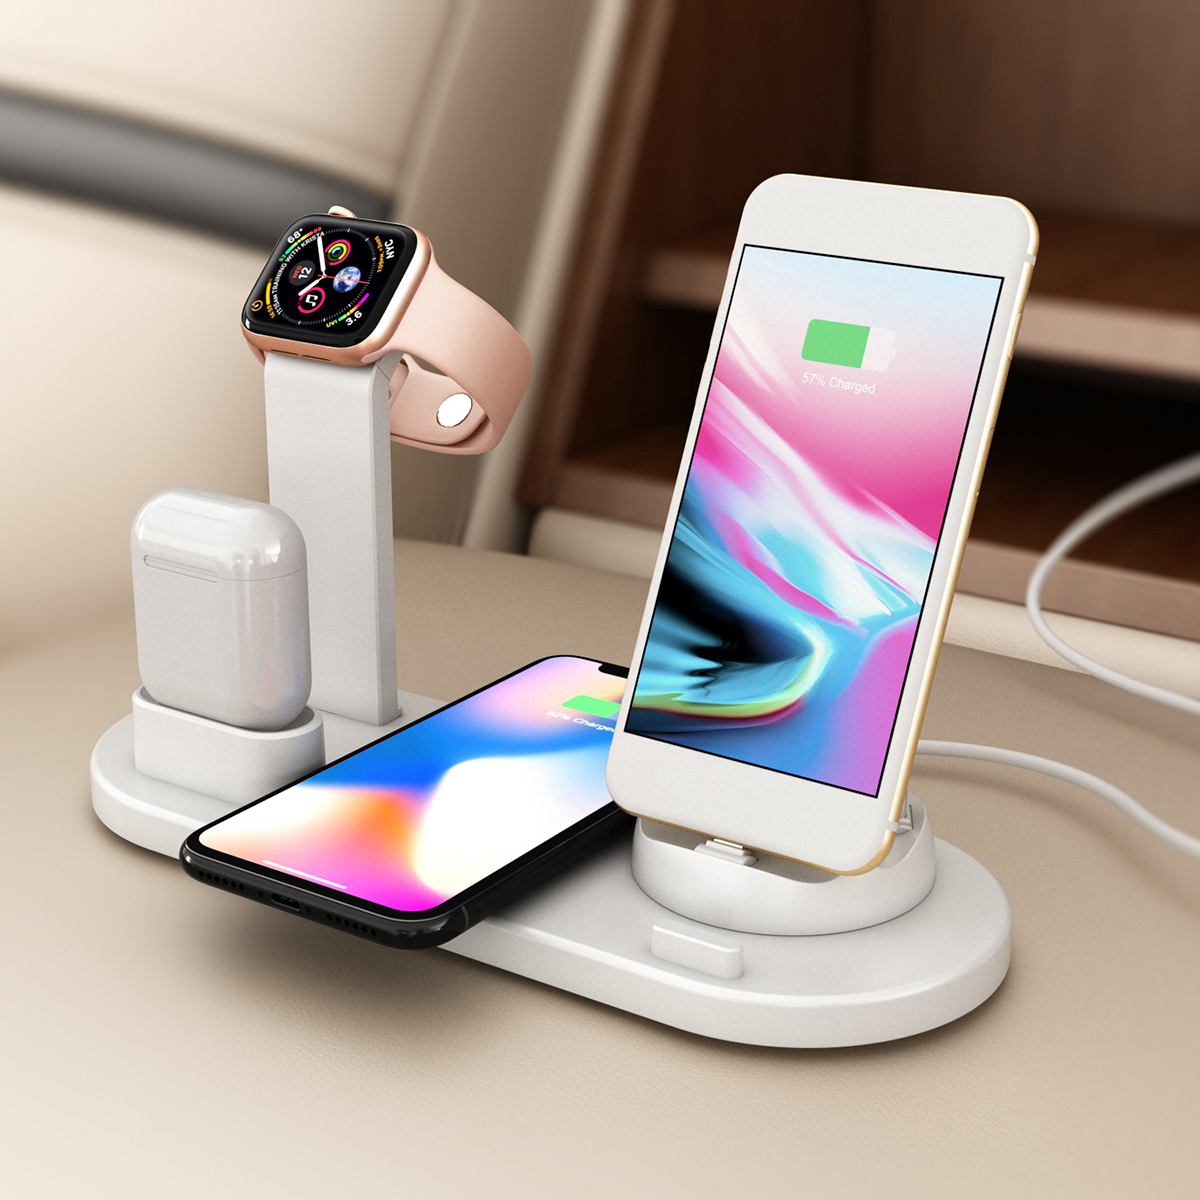 Bakeey-4-in-1-10W-Wireless-Charger-Stand-for-Airpods-Pro-for-Apple-Watch-for-Samsung-Galaxy-S21-Note-1875647-7